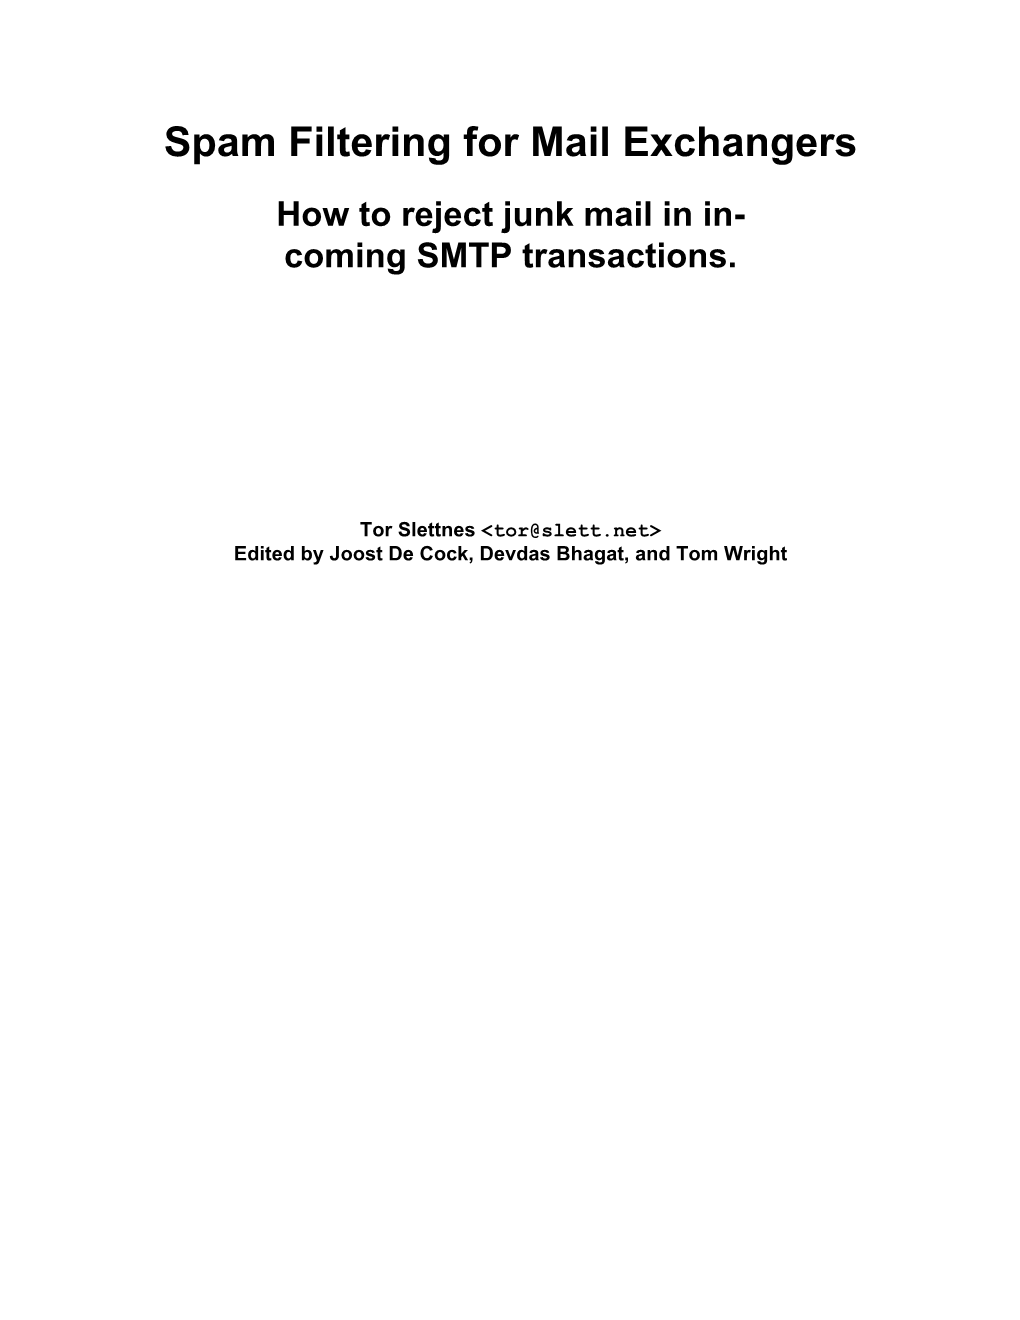 Spam Filtering for Mail Exchangers How to Reject Junk Mail in In- Coming SMTP Transactions